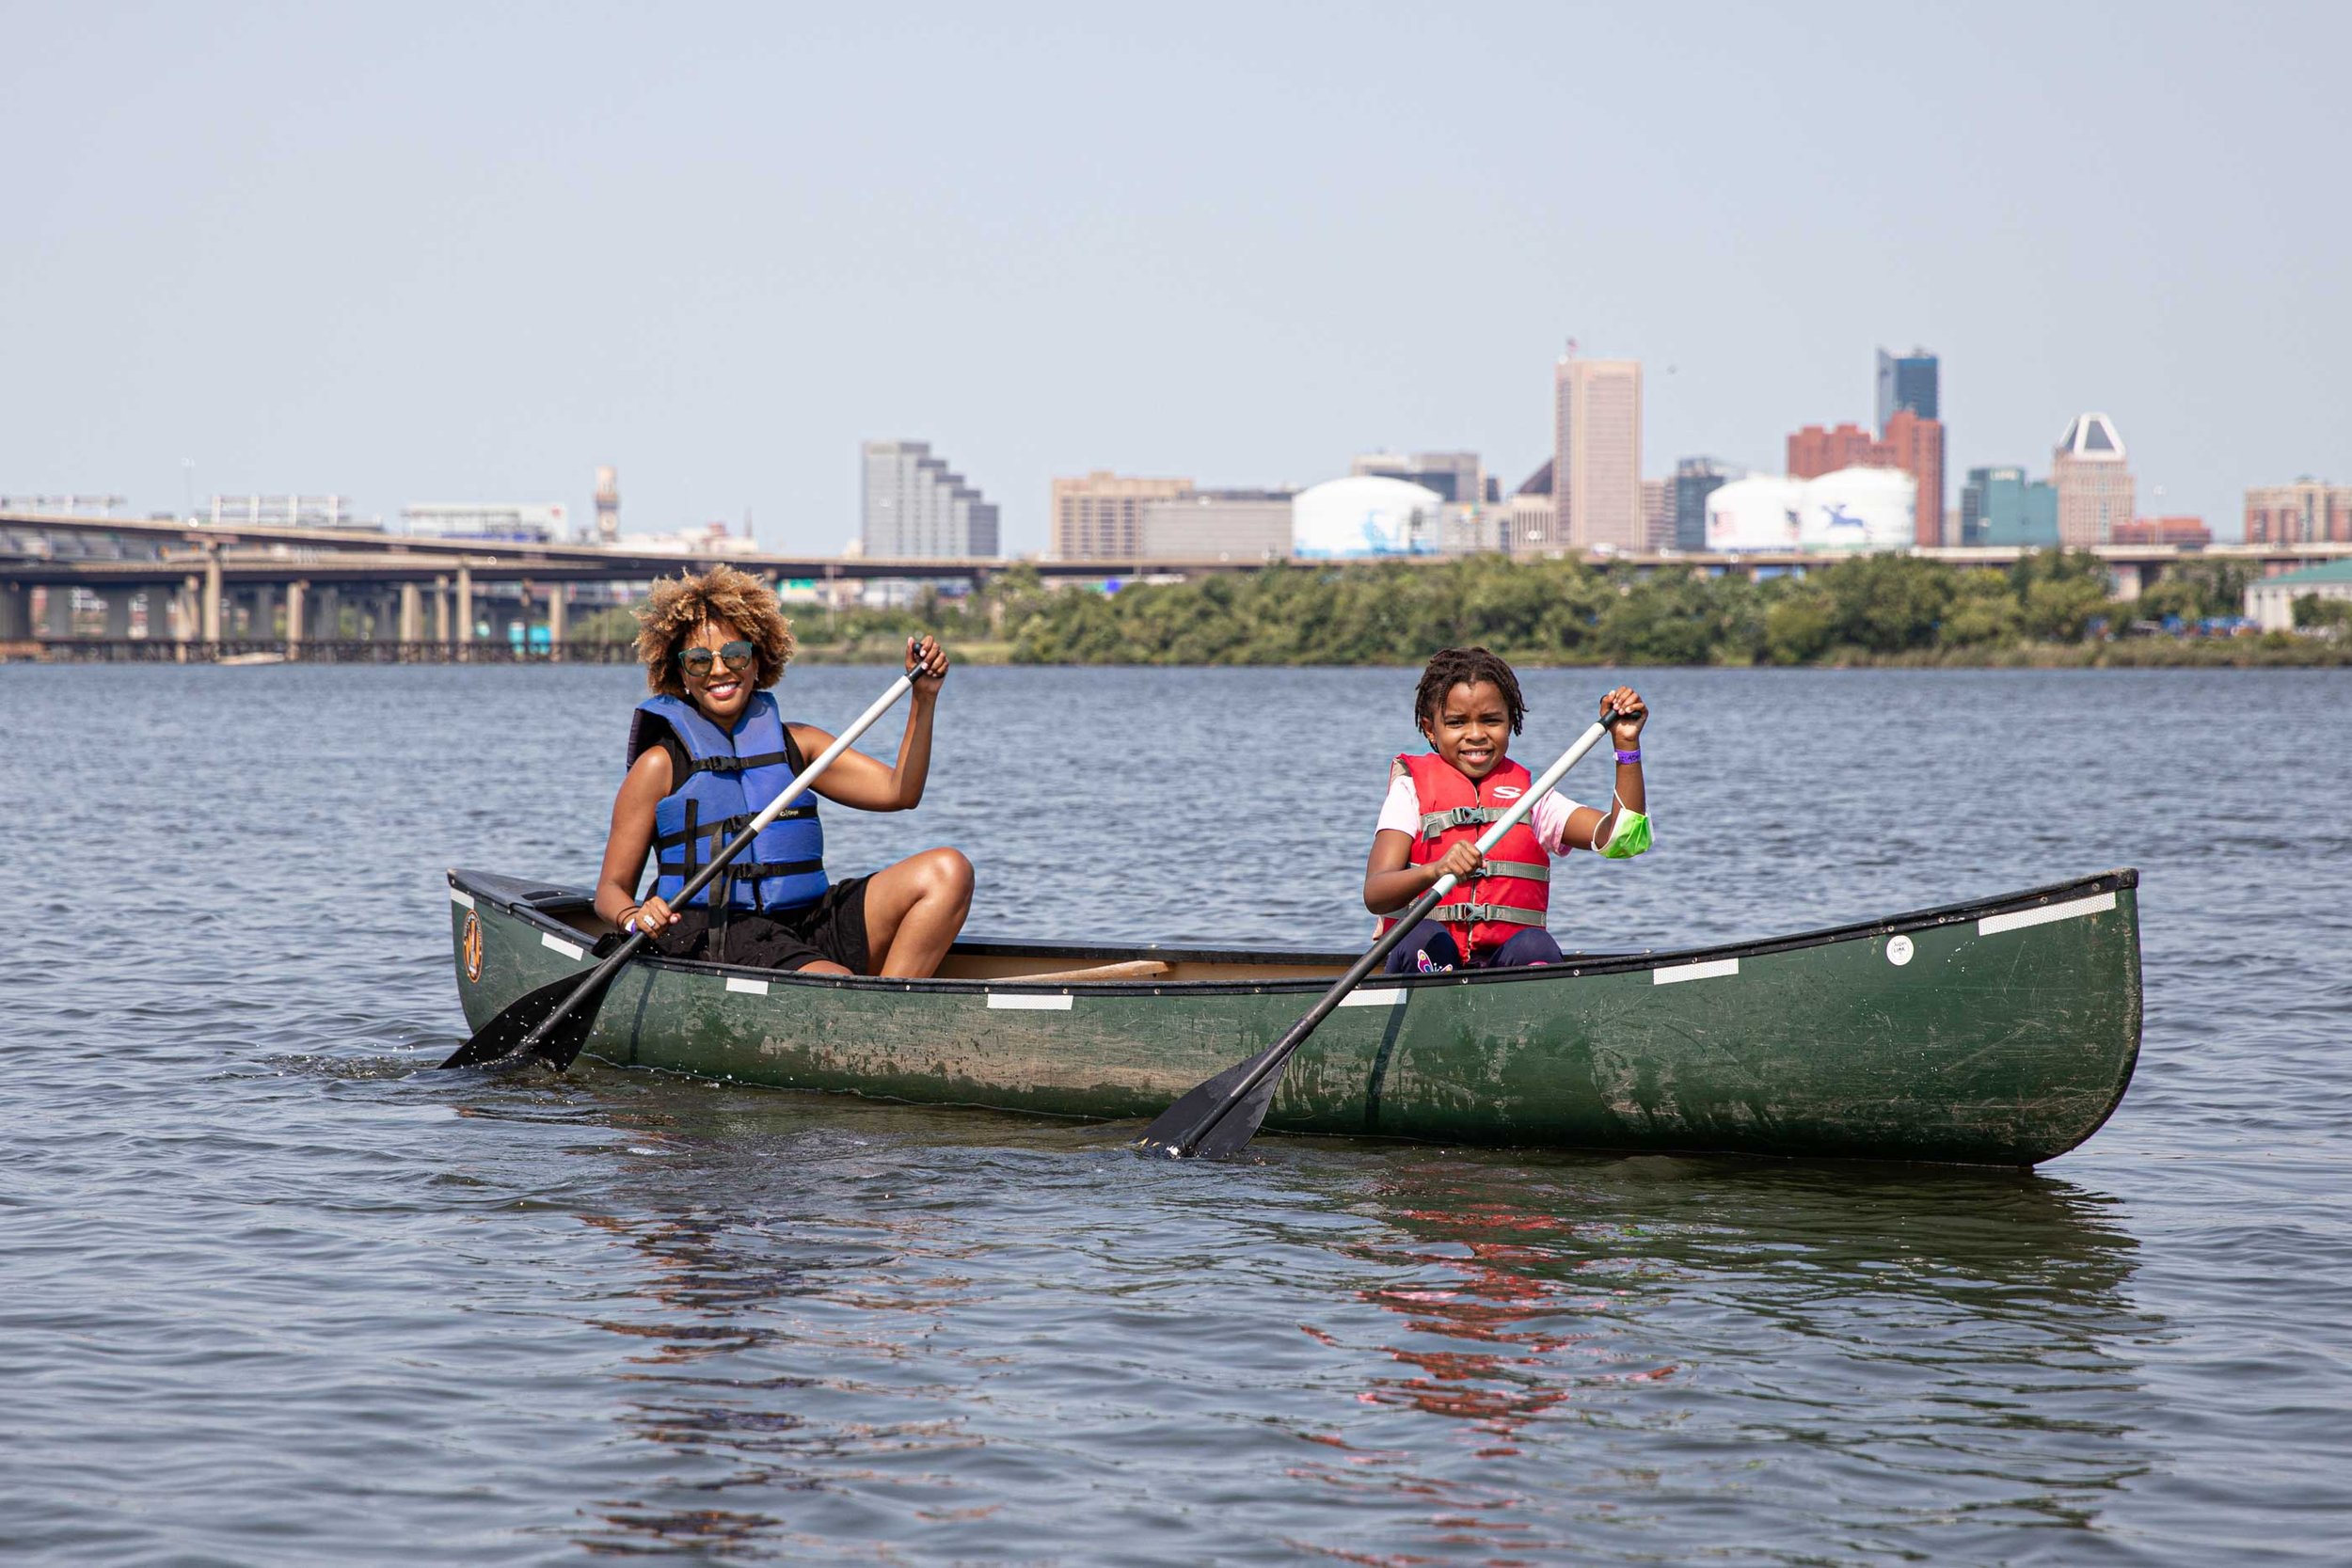  Mother and daughter canoe together in harbor 